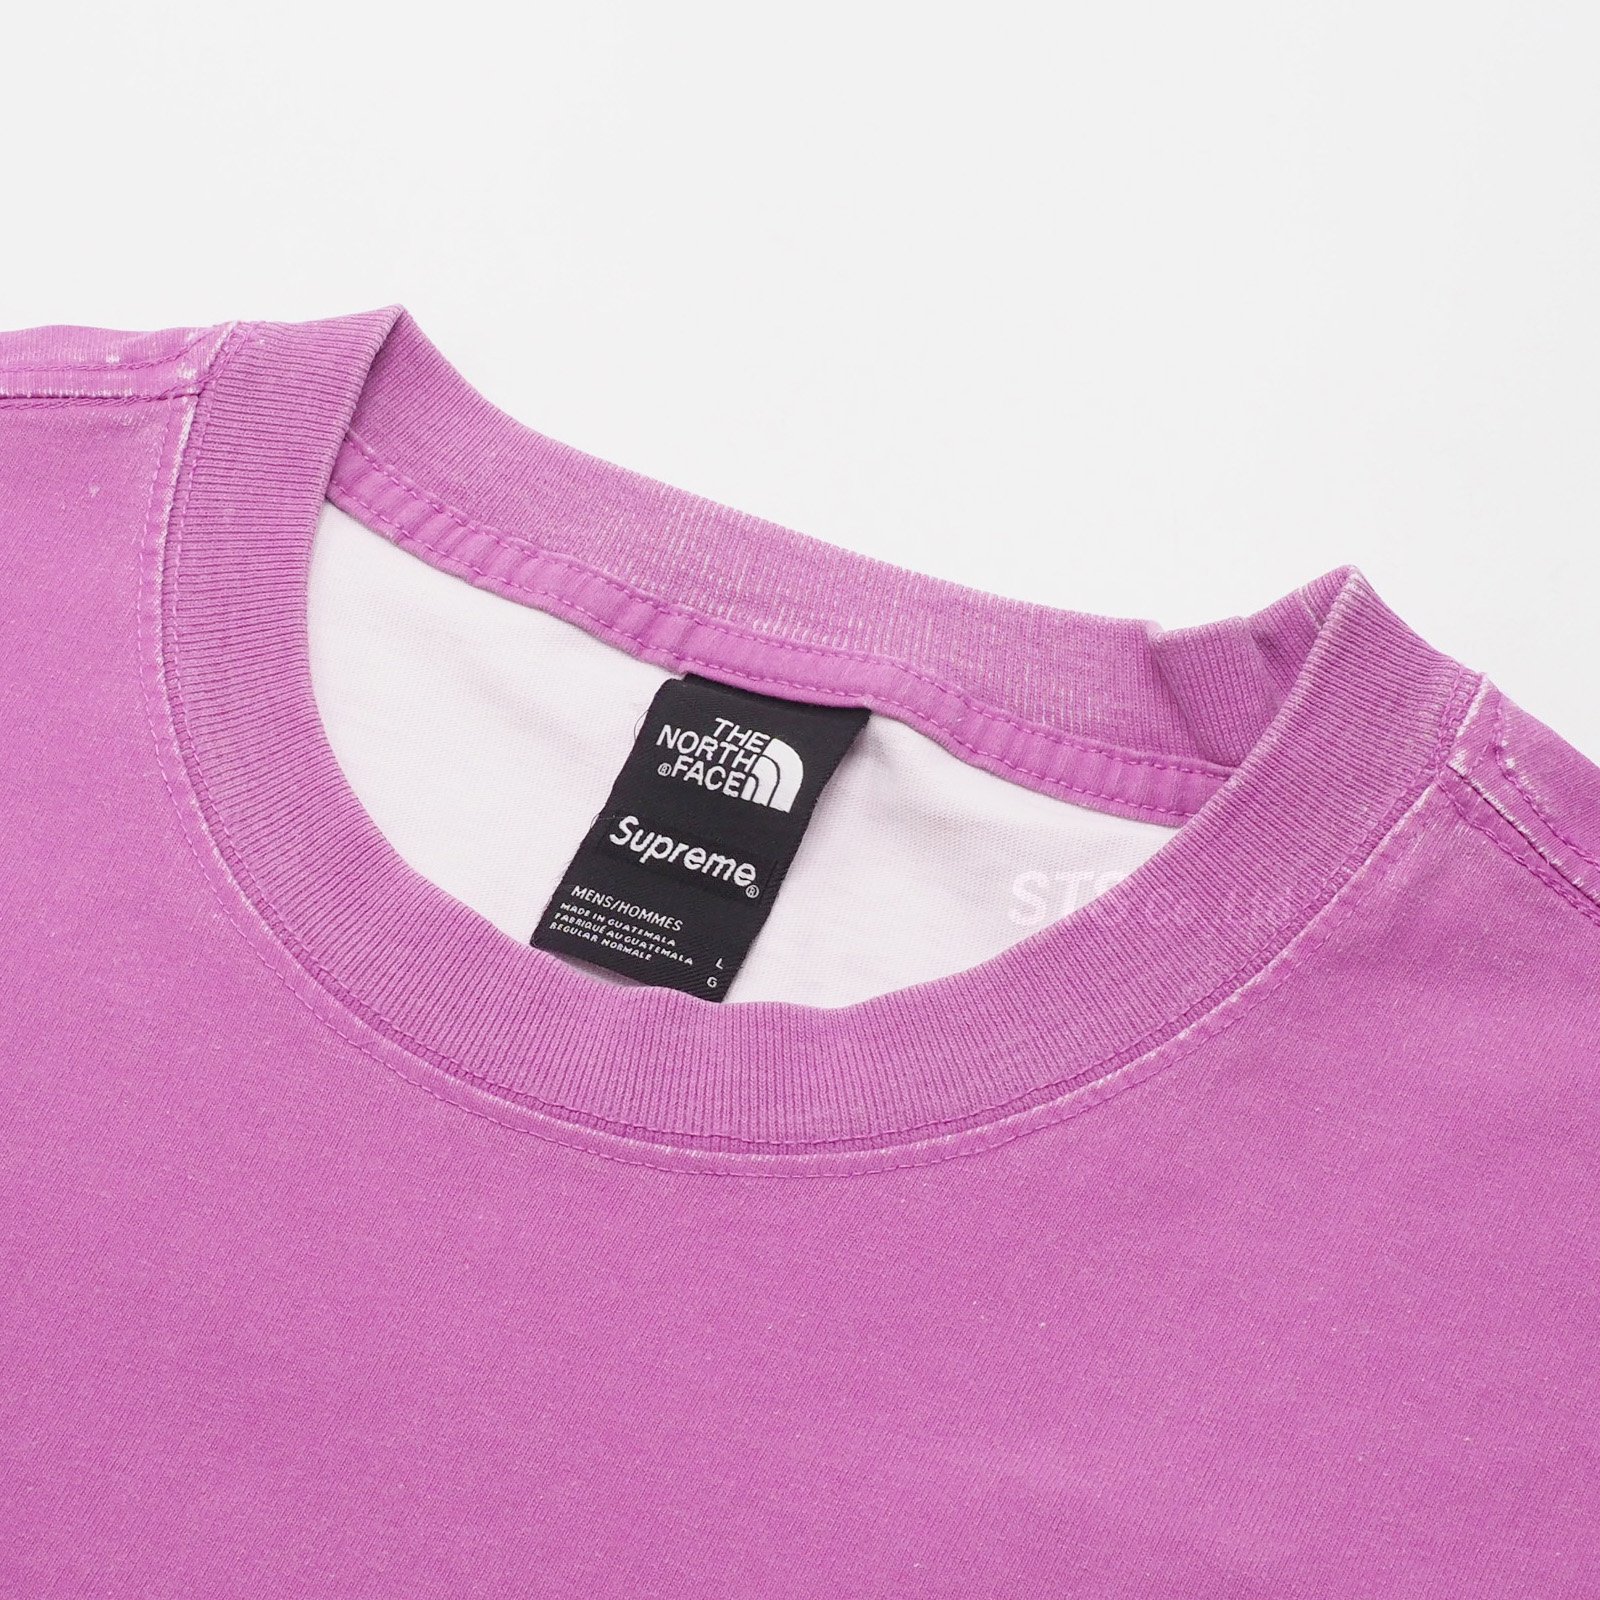 Supreme The North Face Pigment Printed Pocket Tee Black